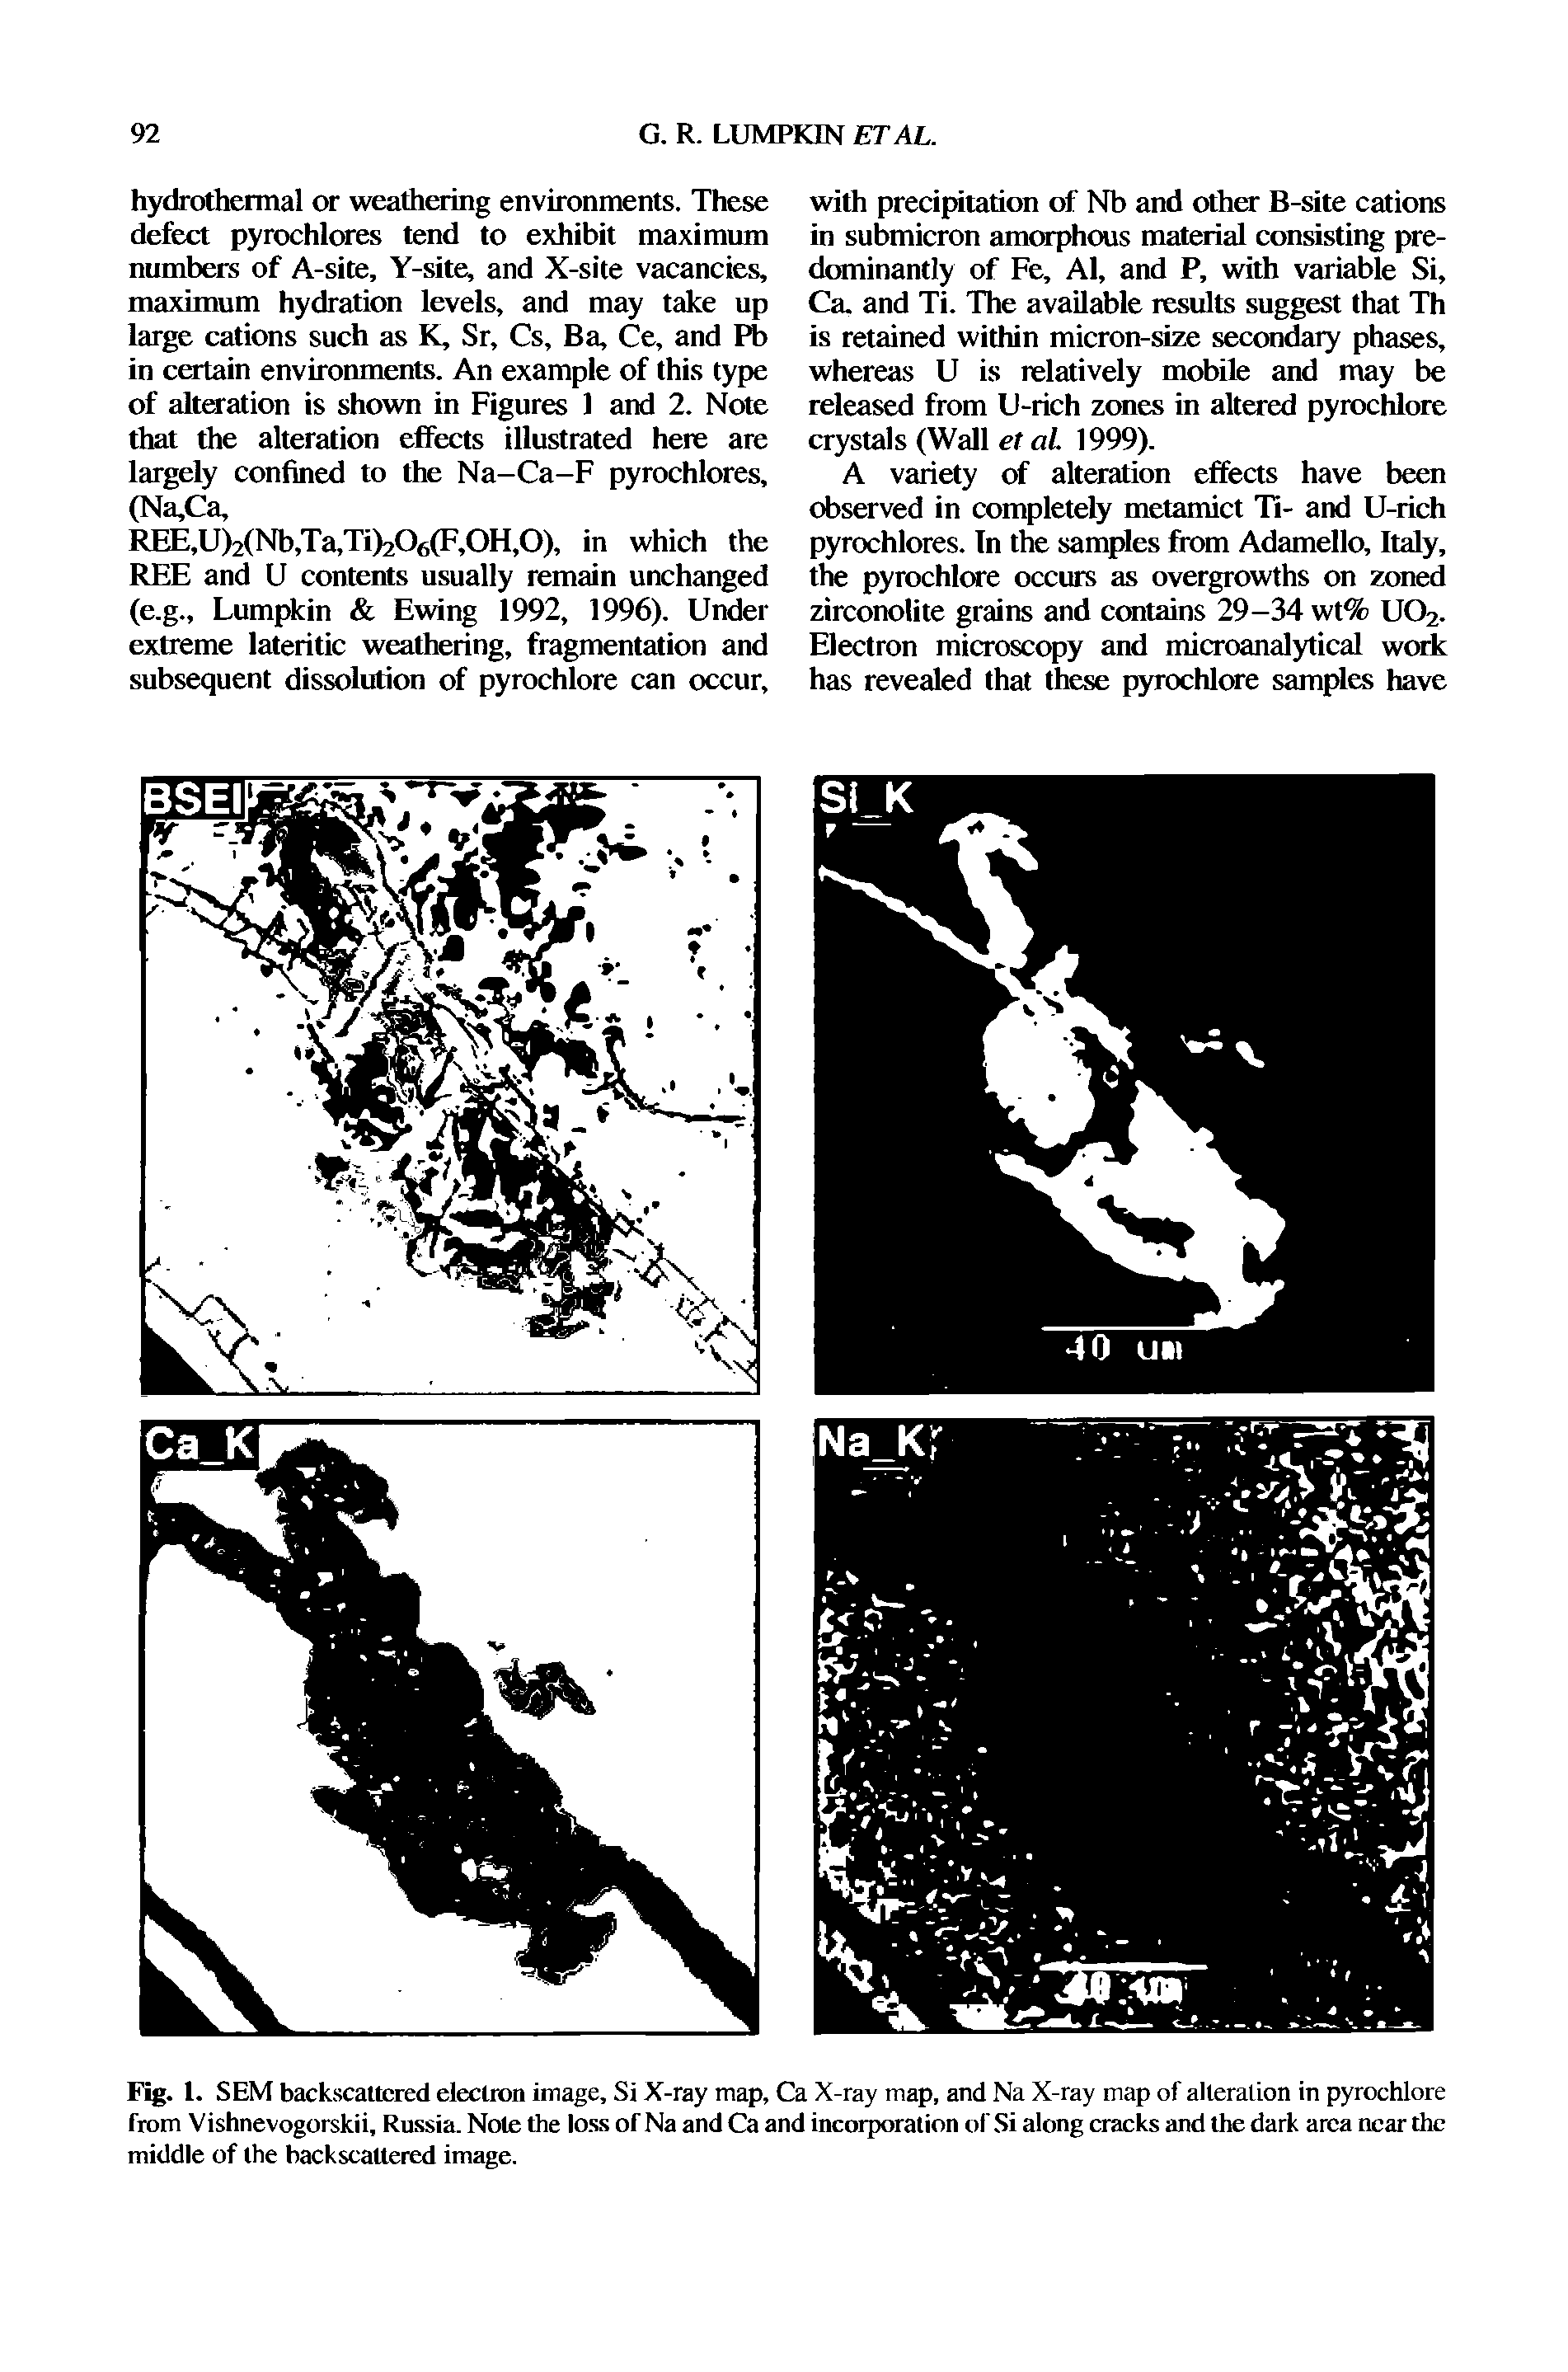 Fig. 1. SEM backscattered electron image, Si X-ray map, Ca X-ray map, and Na X-ray map of alteration in pyrochlore from Vishnevogorskii, Russia. Note the loss of Na and Ca and incorporation of Si along cracks and the dark area near the middle of the backseaUered image.